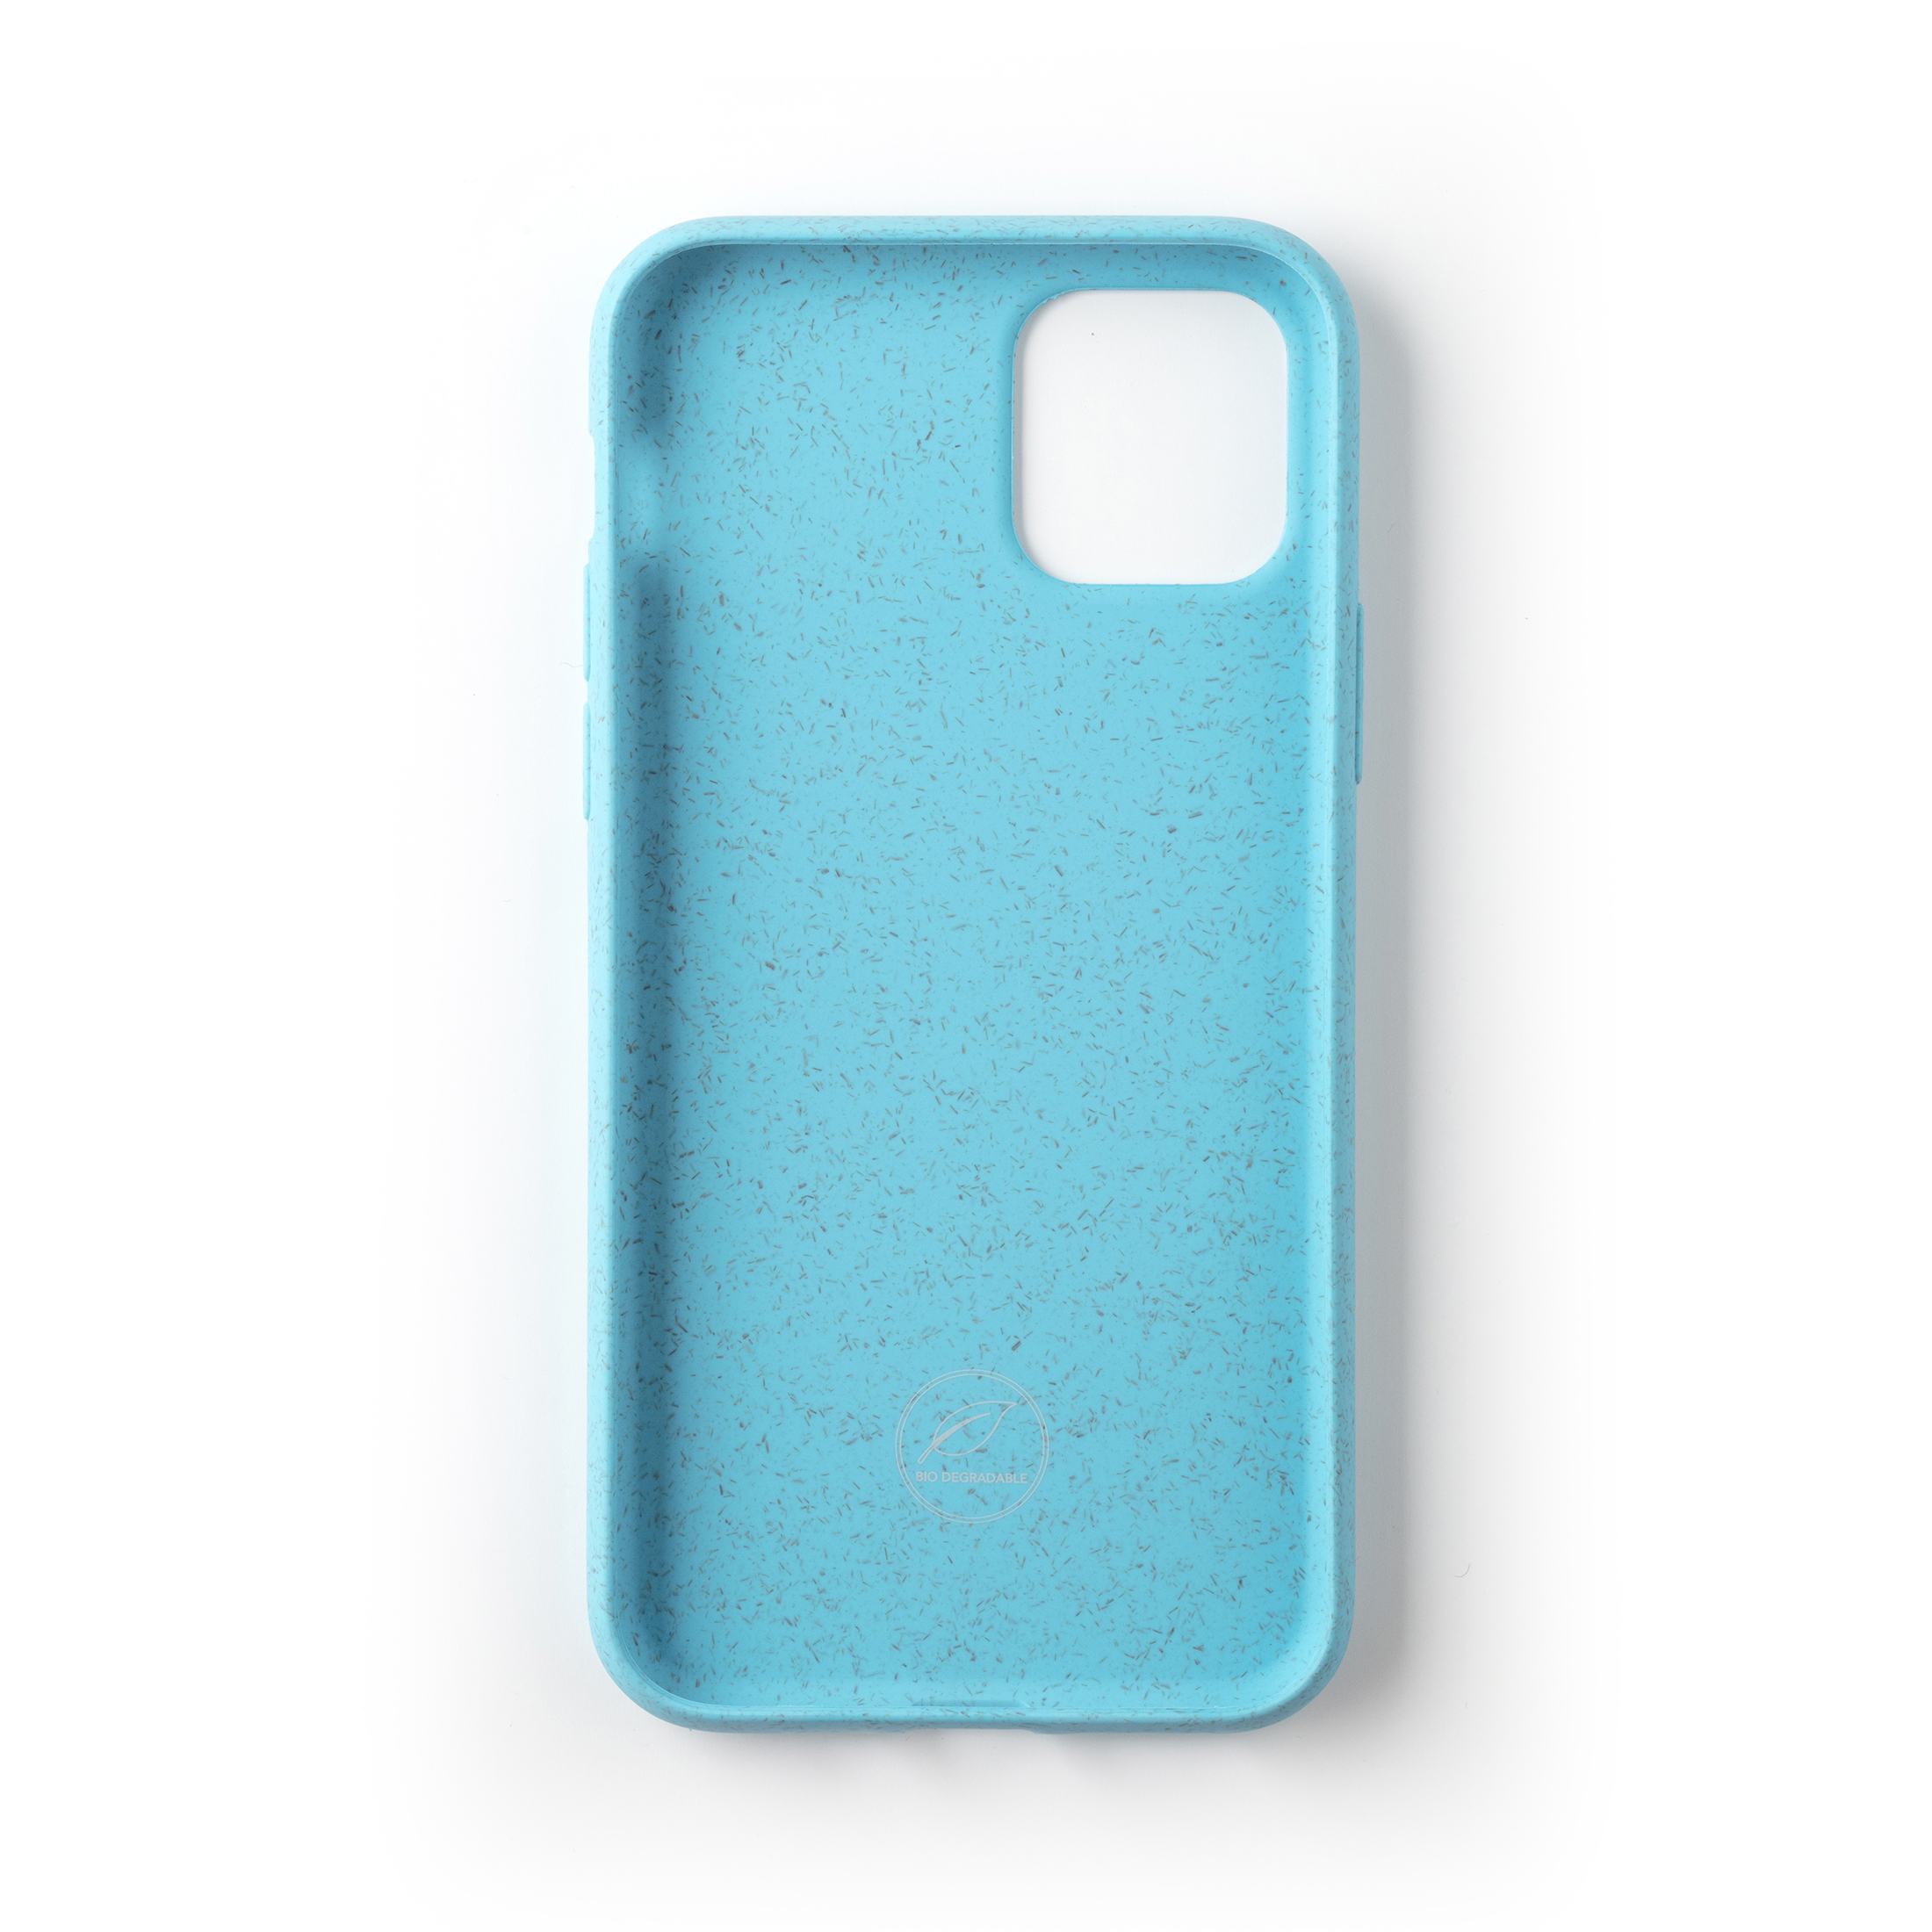 ECO FASHION BY 11 PRO, RIP11, Backcover, blue light iPhone Apple, WILMA